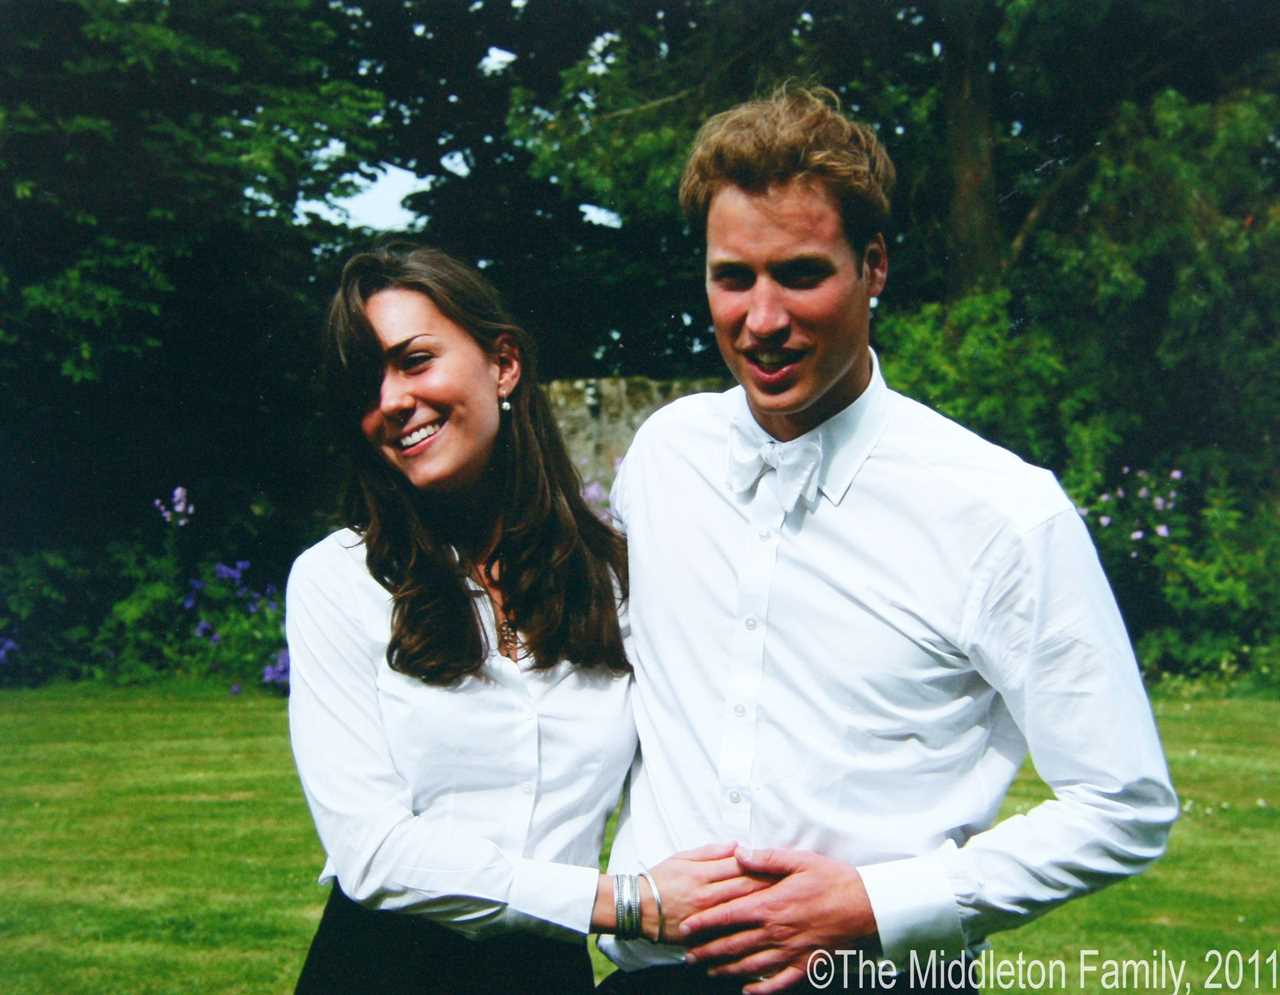 Kate and William met at university and began dating two years later